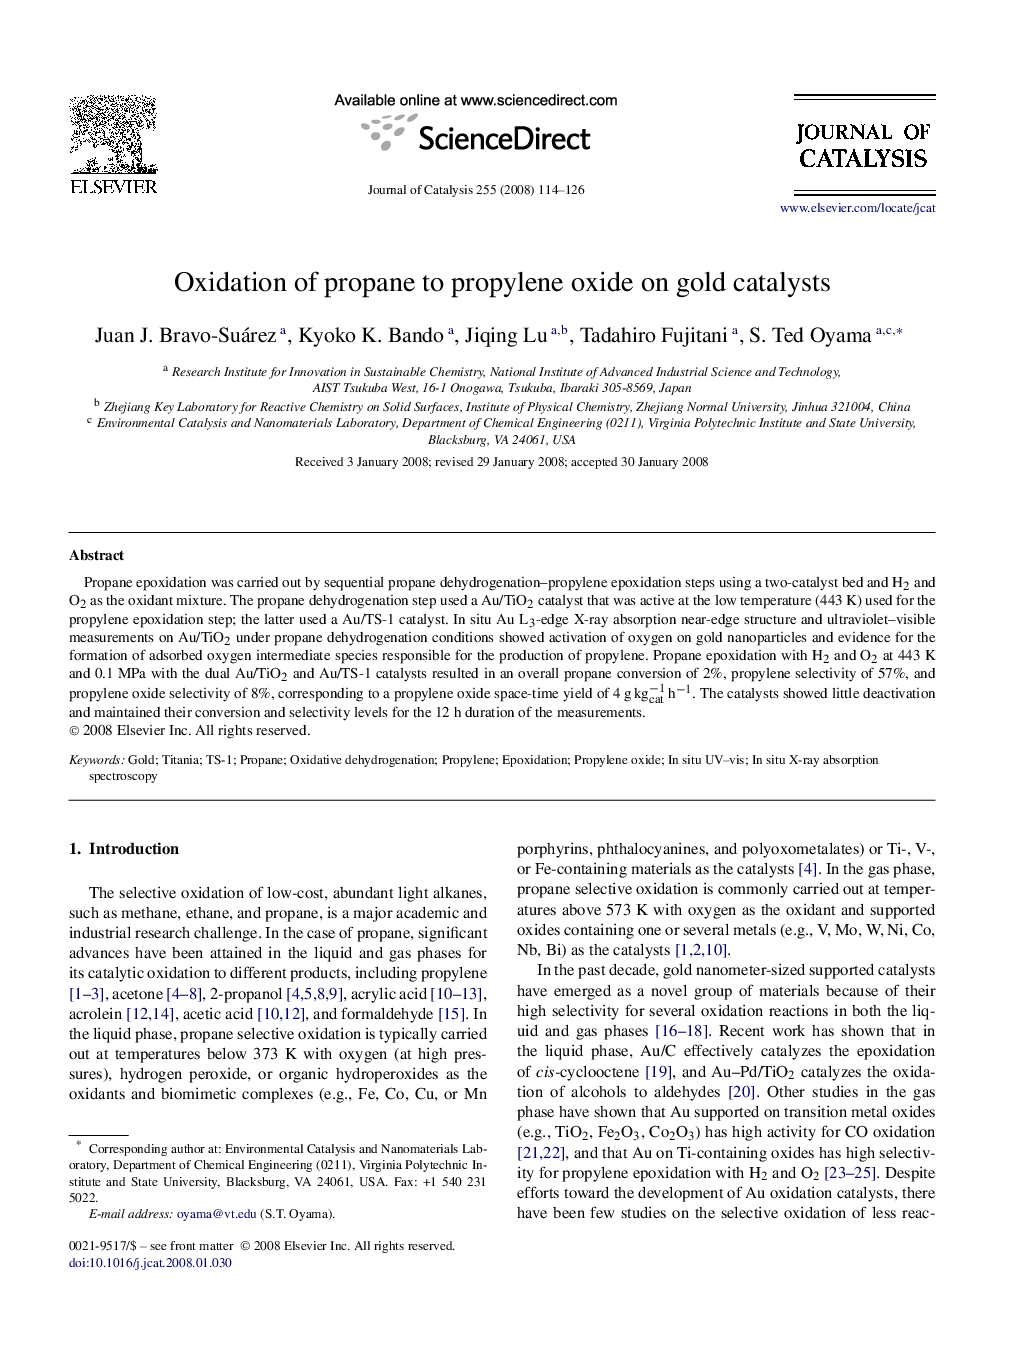 Oxidation of propane to propylene oxide on gold catalysts